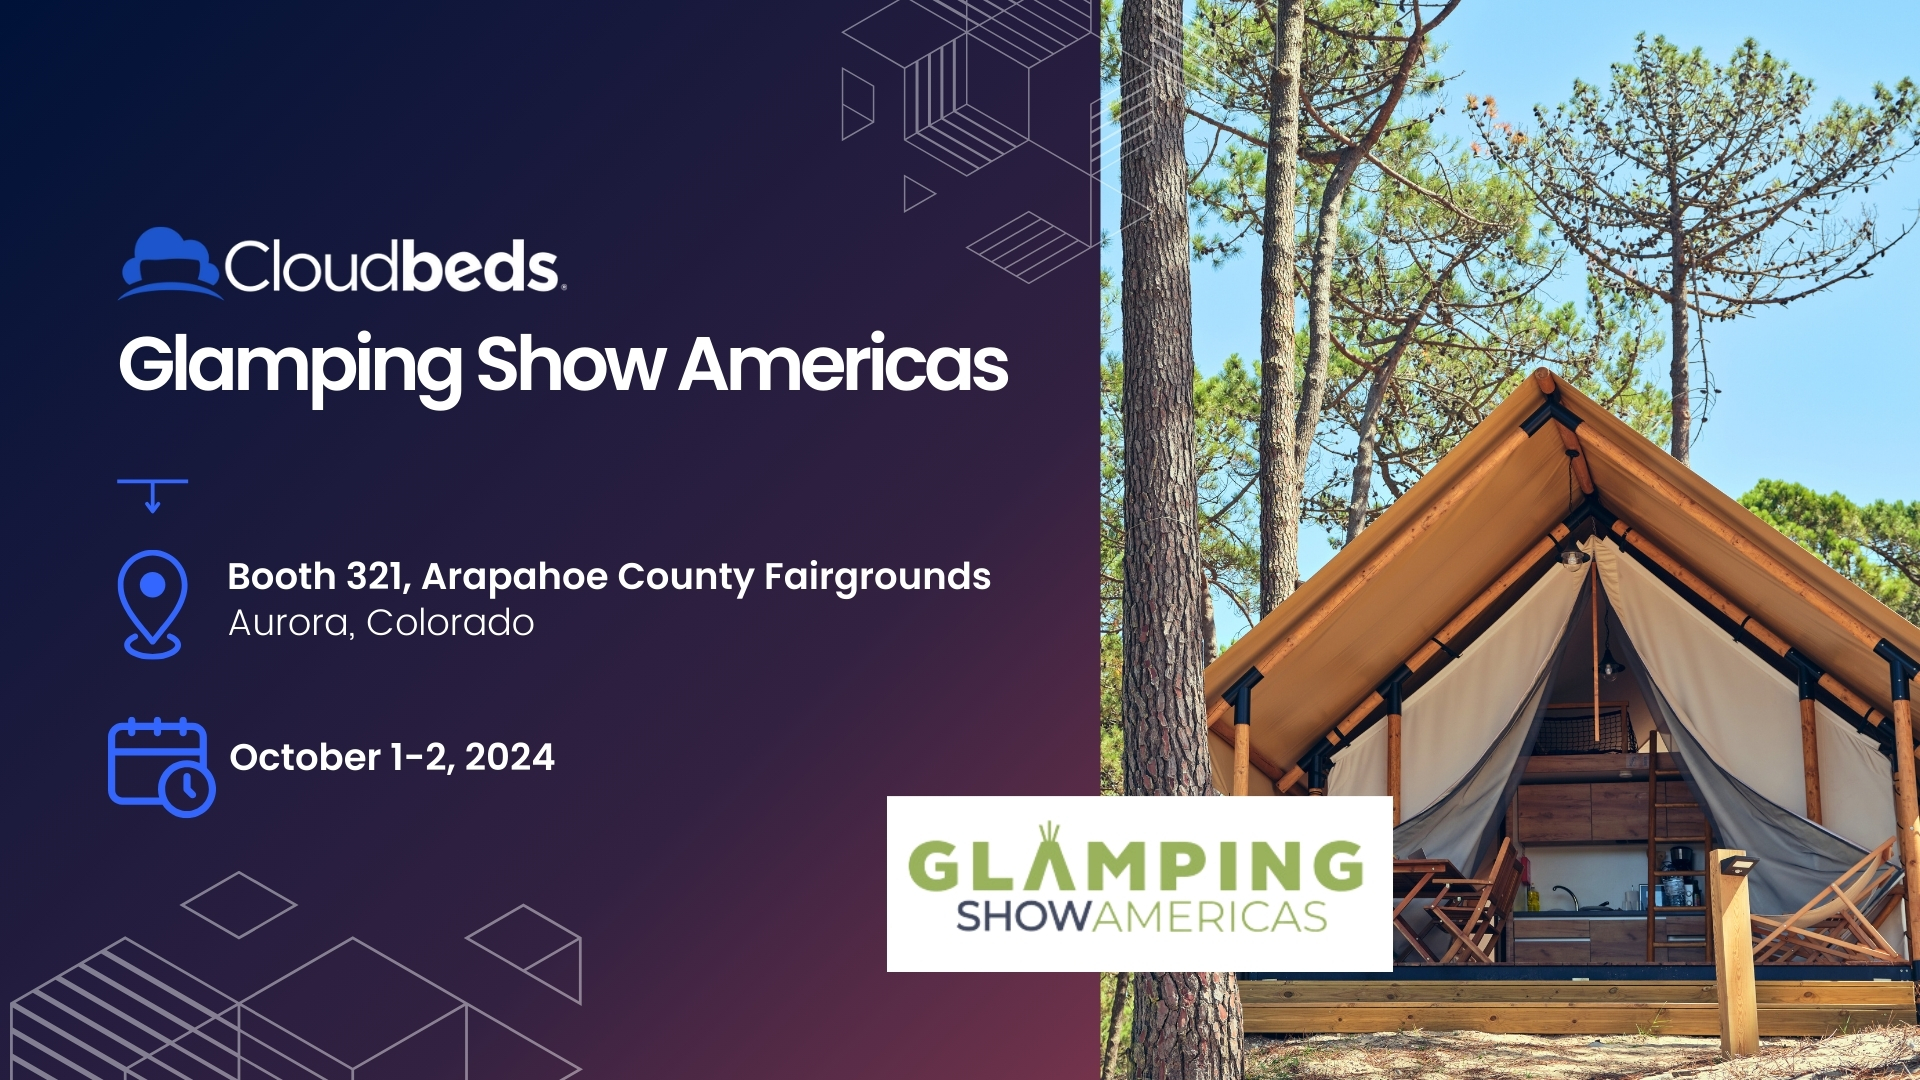 Glamping Show Americas 2024